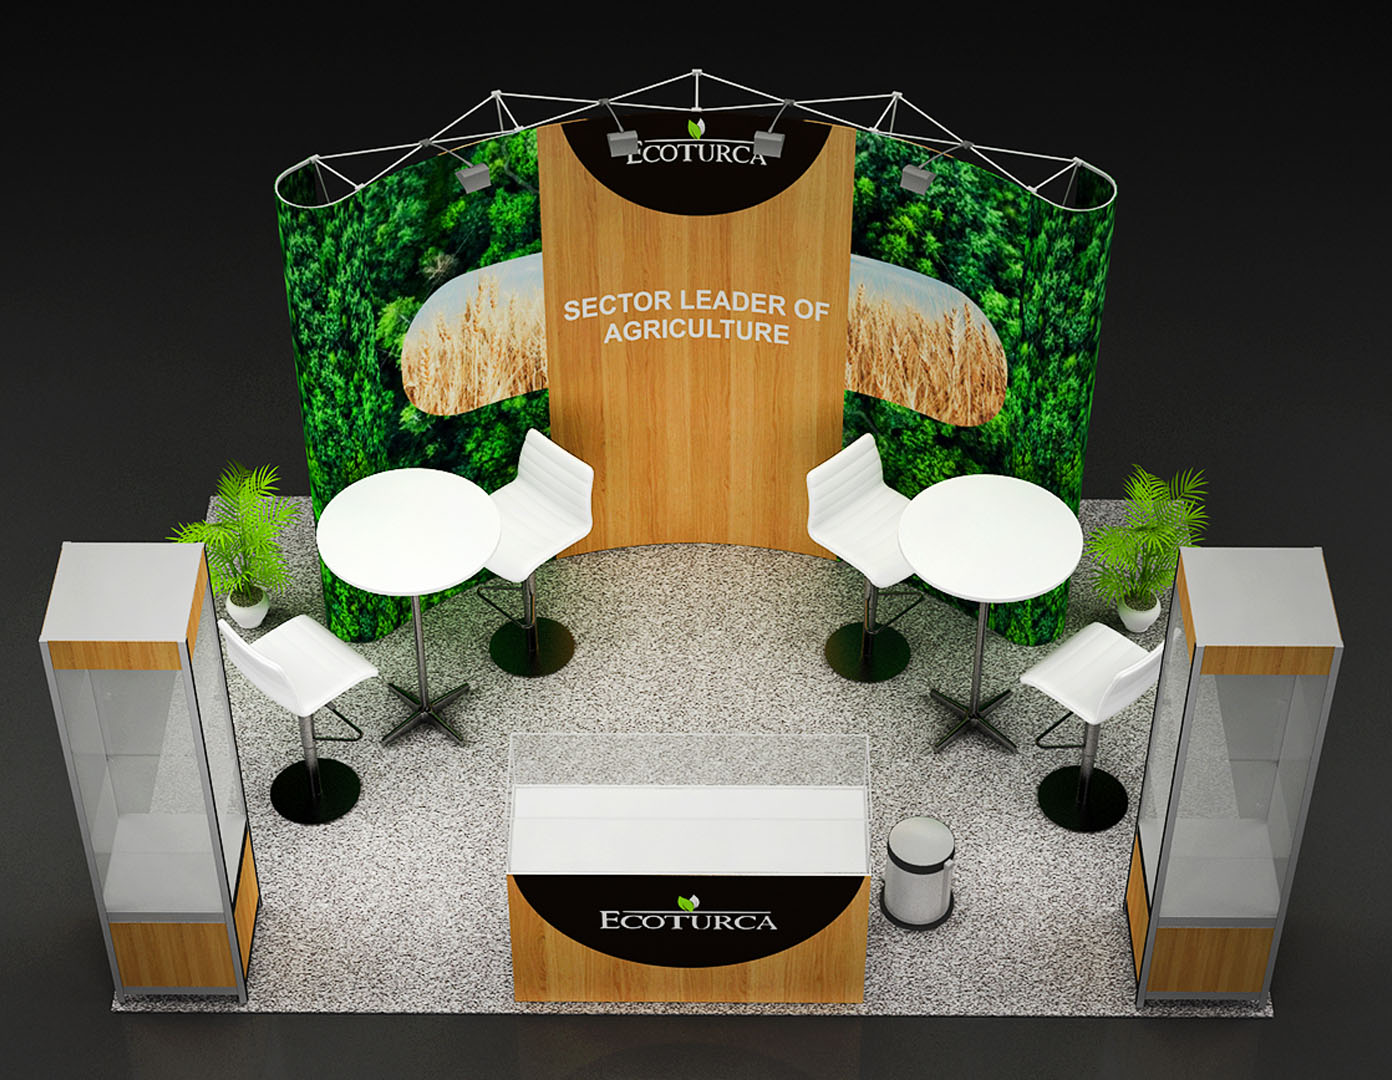 Portable Trade Show Booth & Display